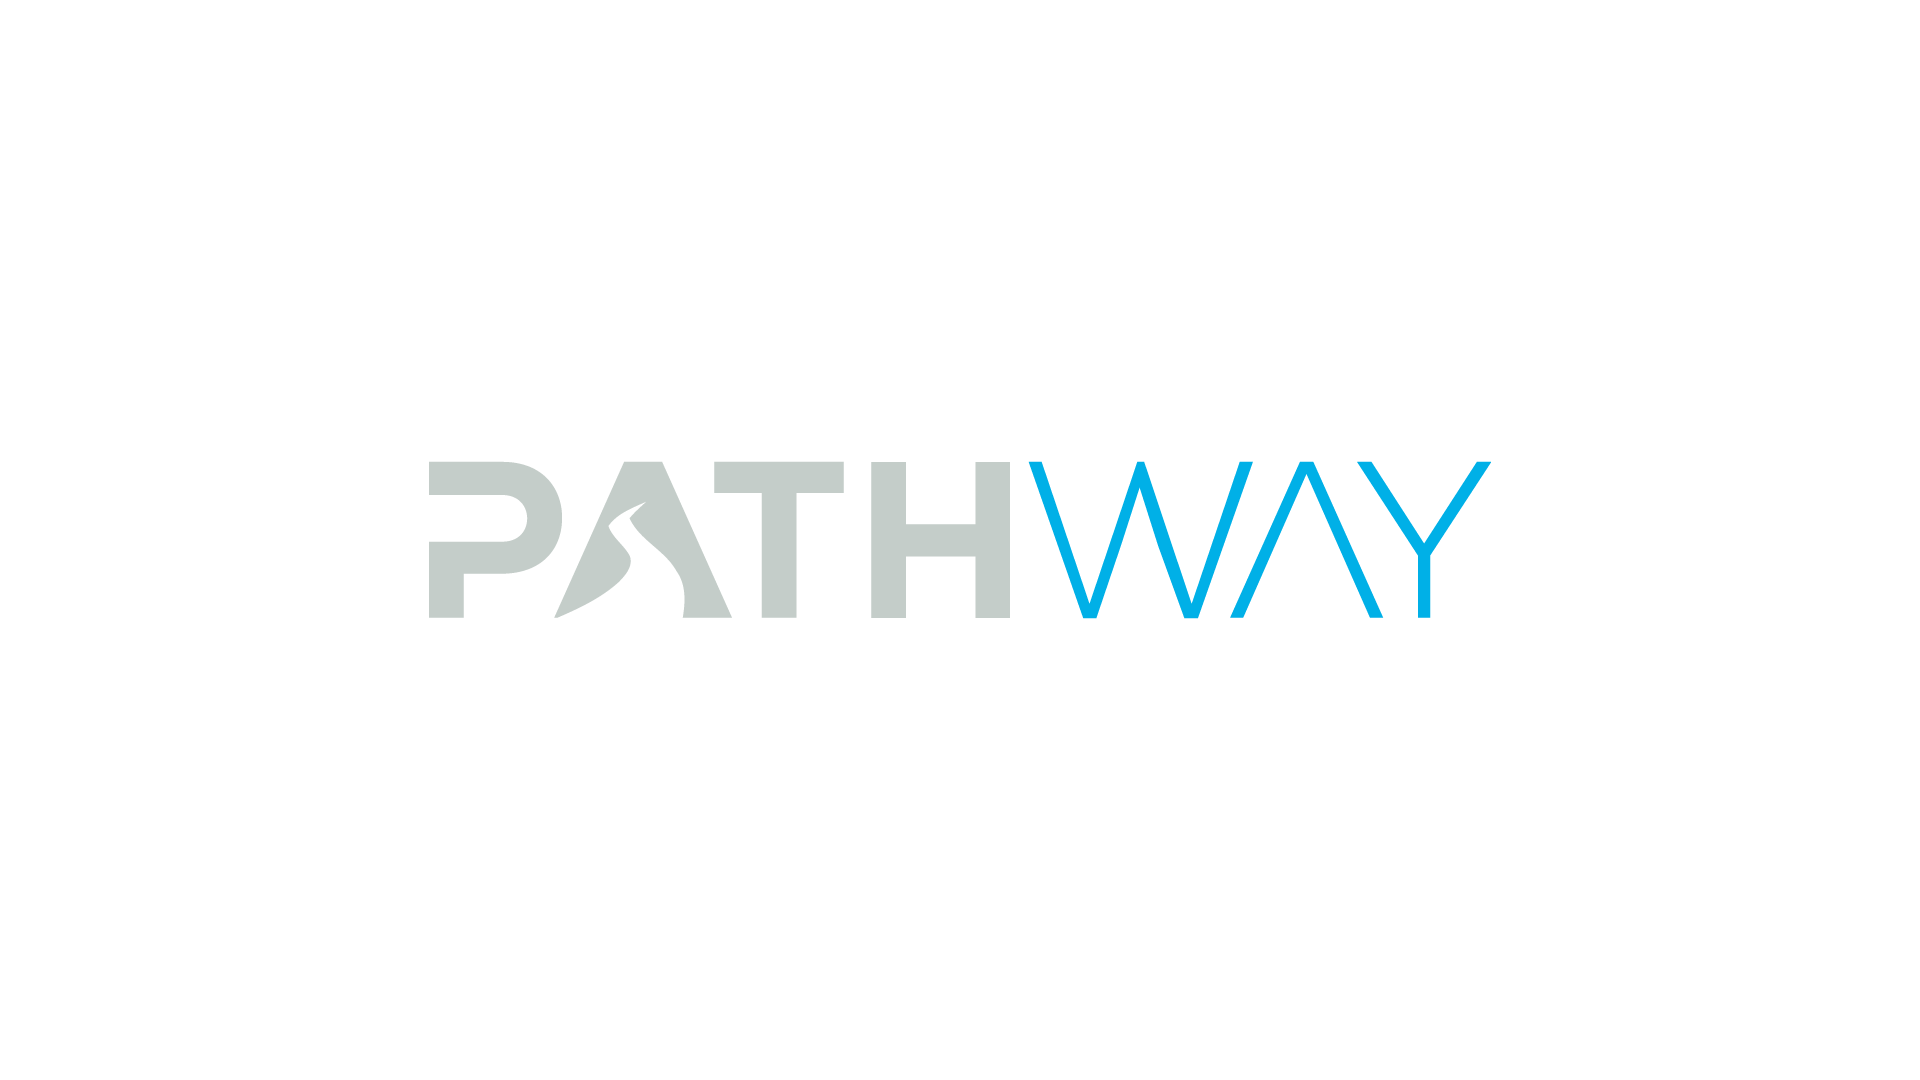 Copy of Copy of Pathway PNG.png